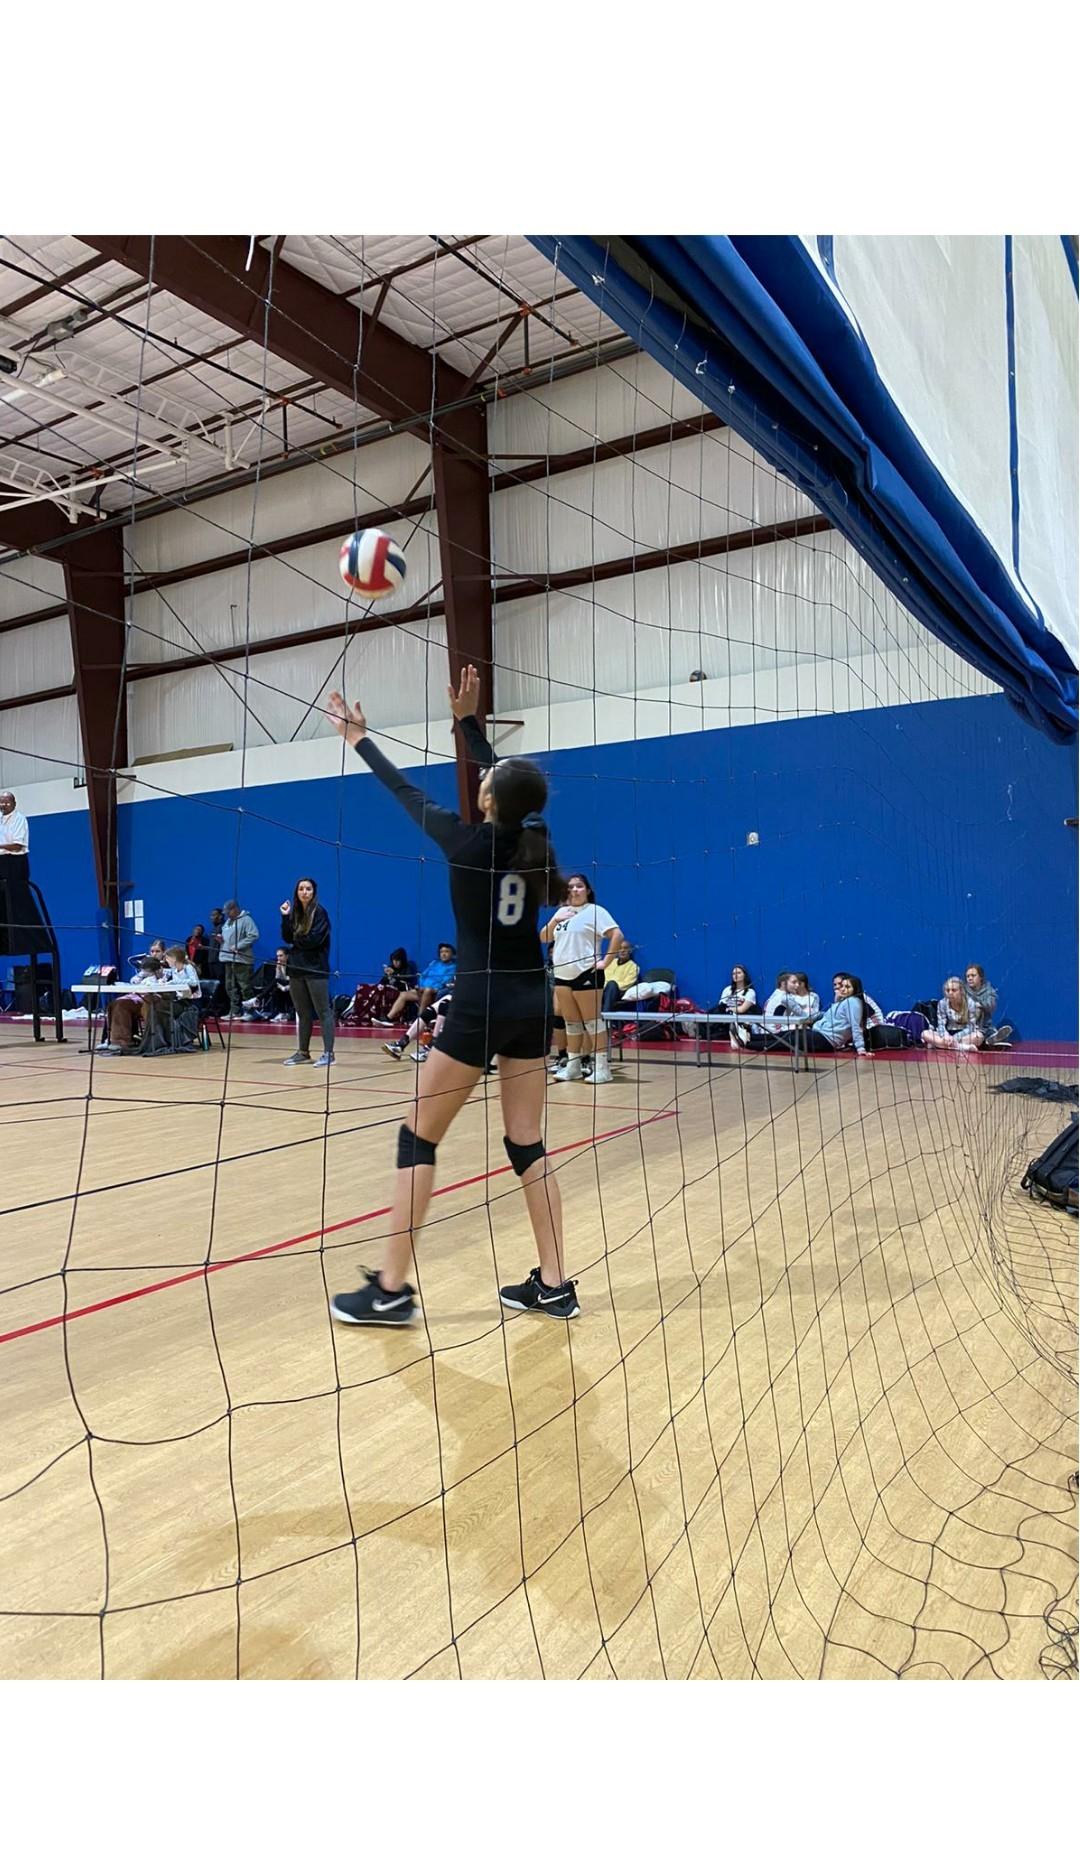 this was at a volleyball tournament and i was serving 🤩🏐 i had my first ever babysitting job yesterday for people i didnt know 👶 it was really fun, i had to discipline them some though but they listened to me so its all good 👌🏼